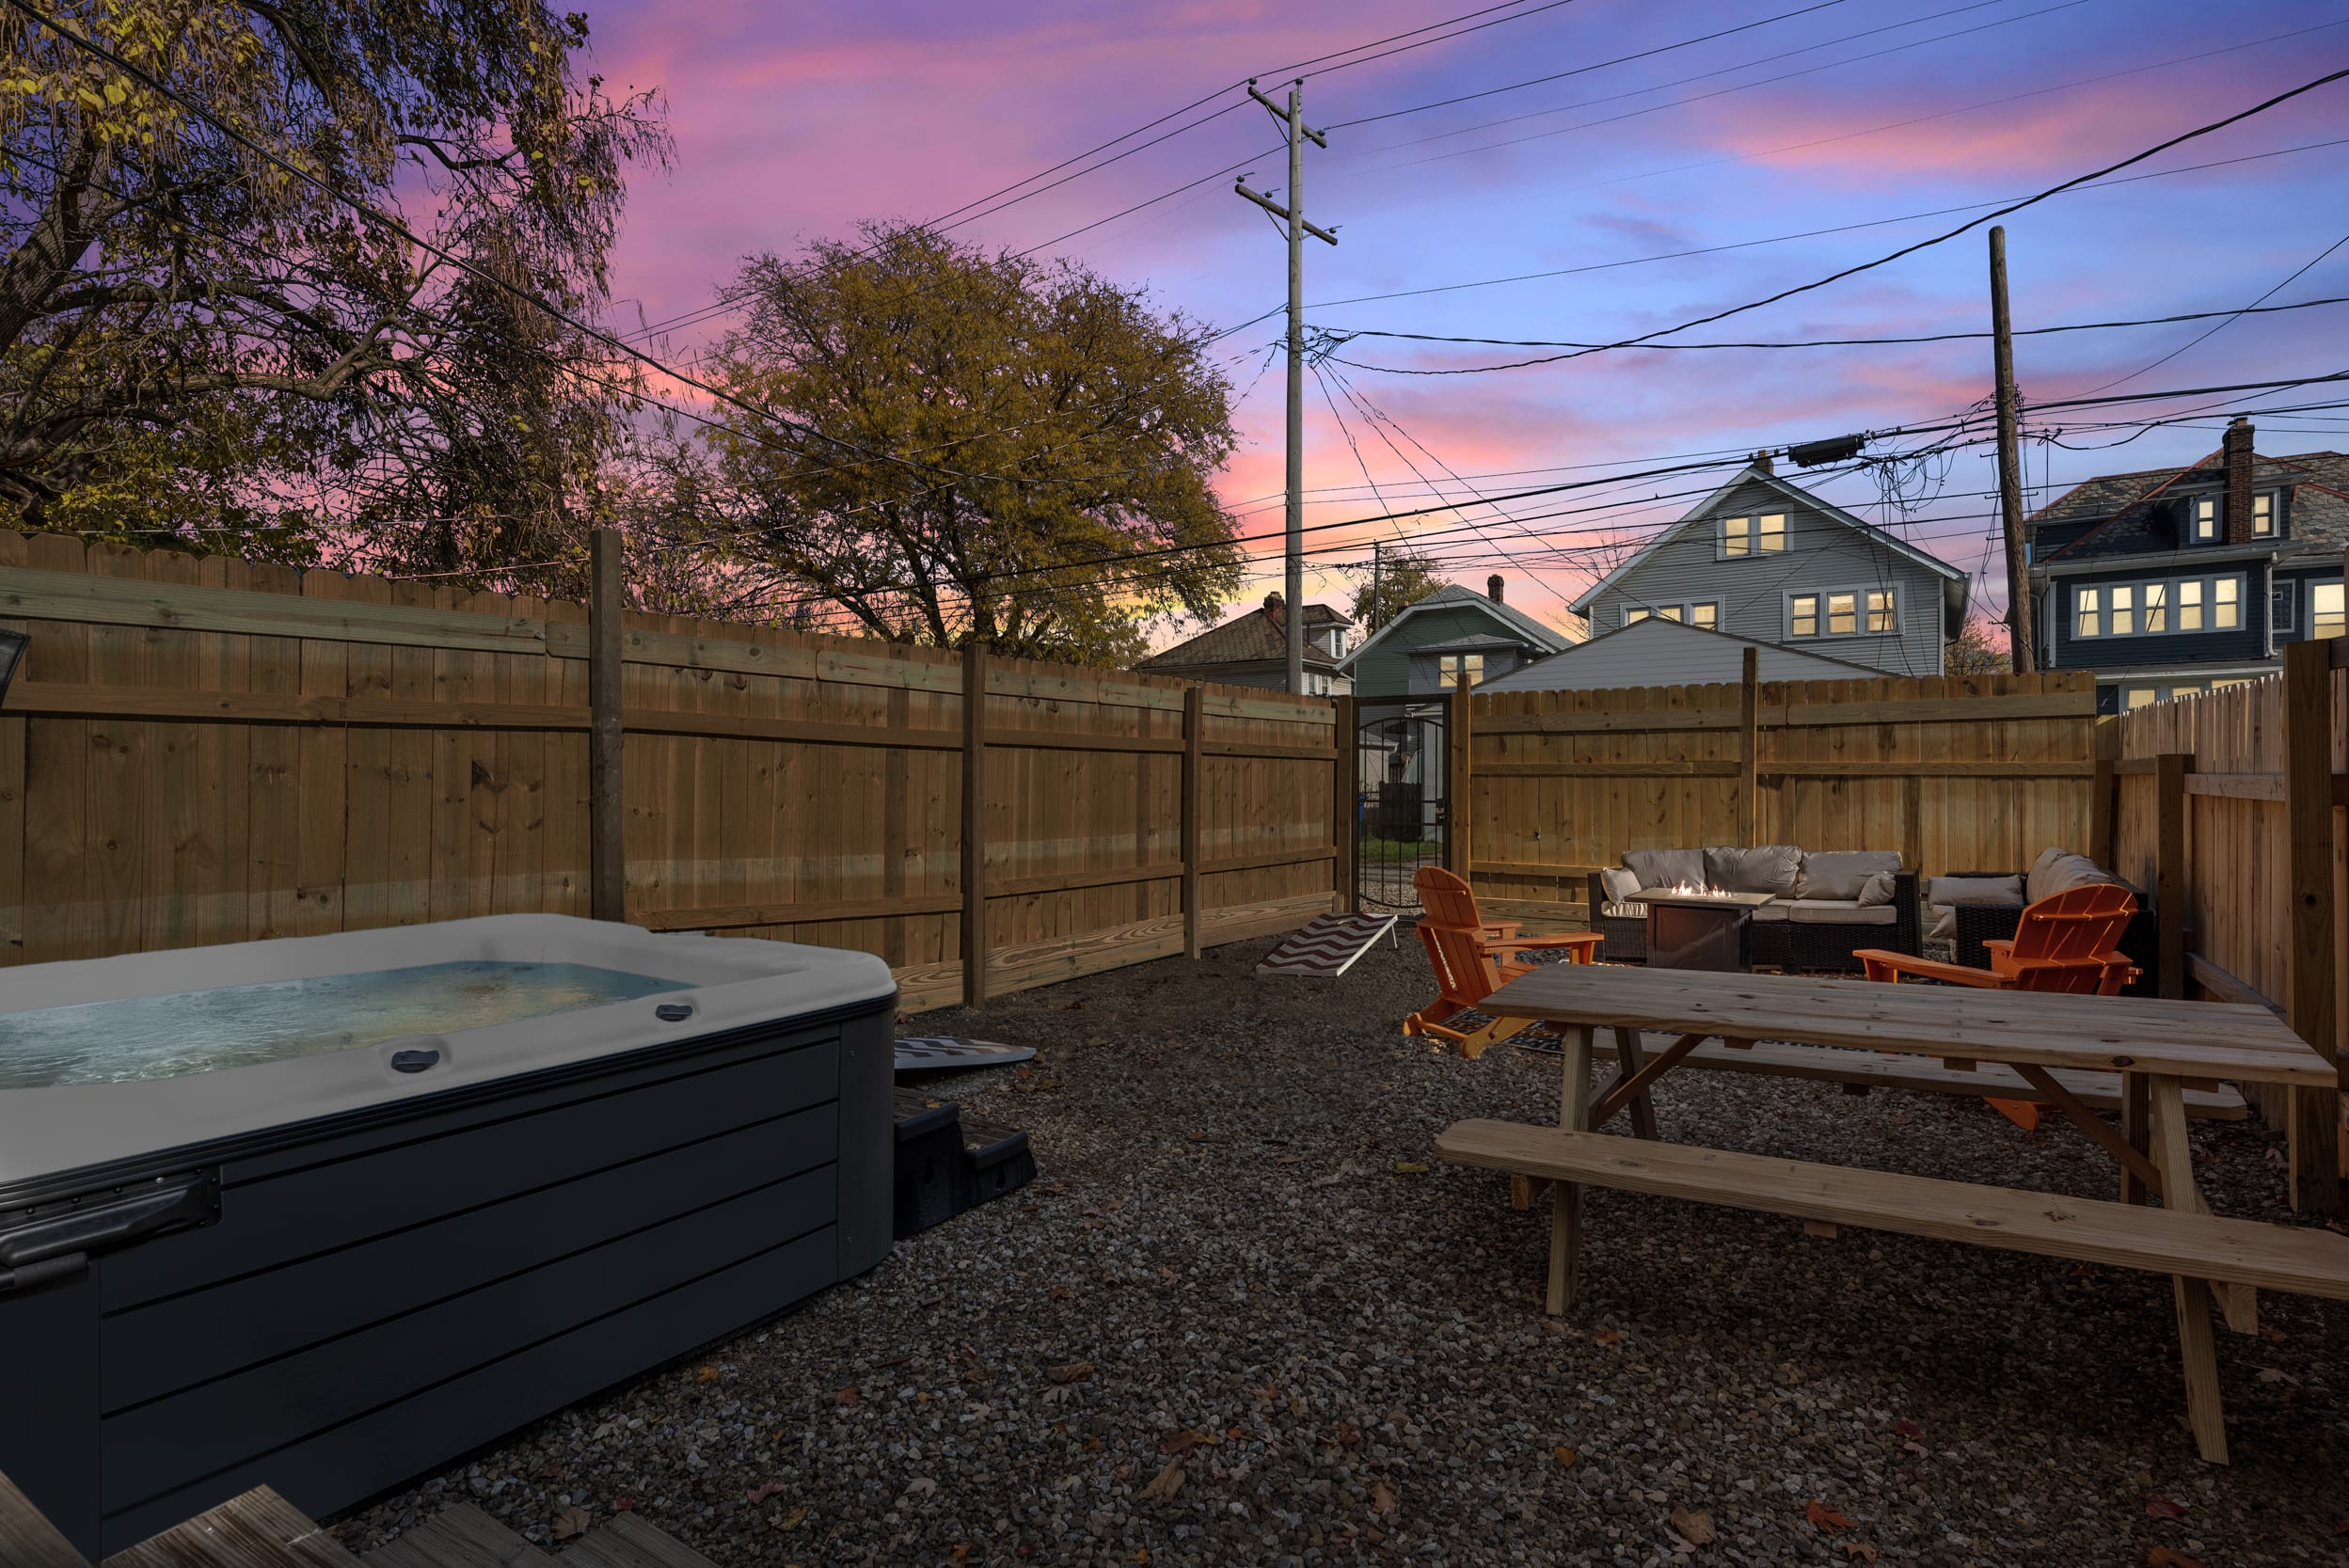 Enjoy our hot tub and accommodating space!